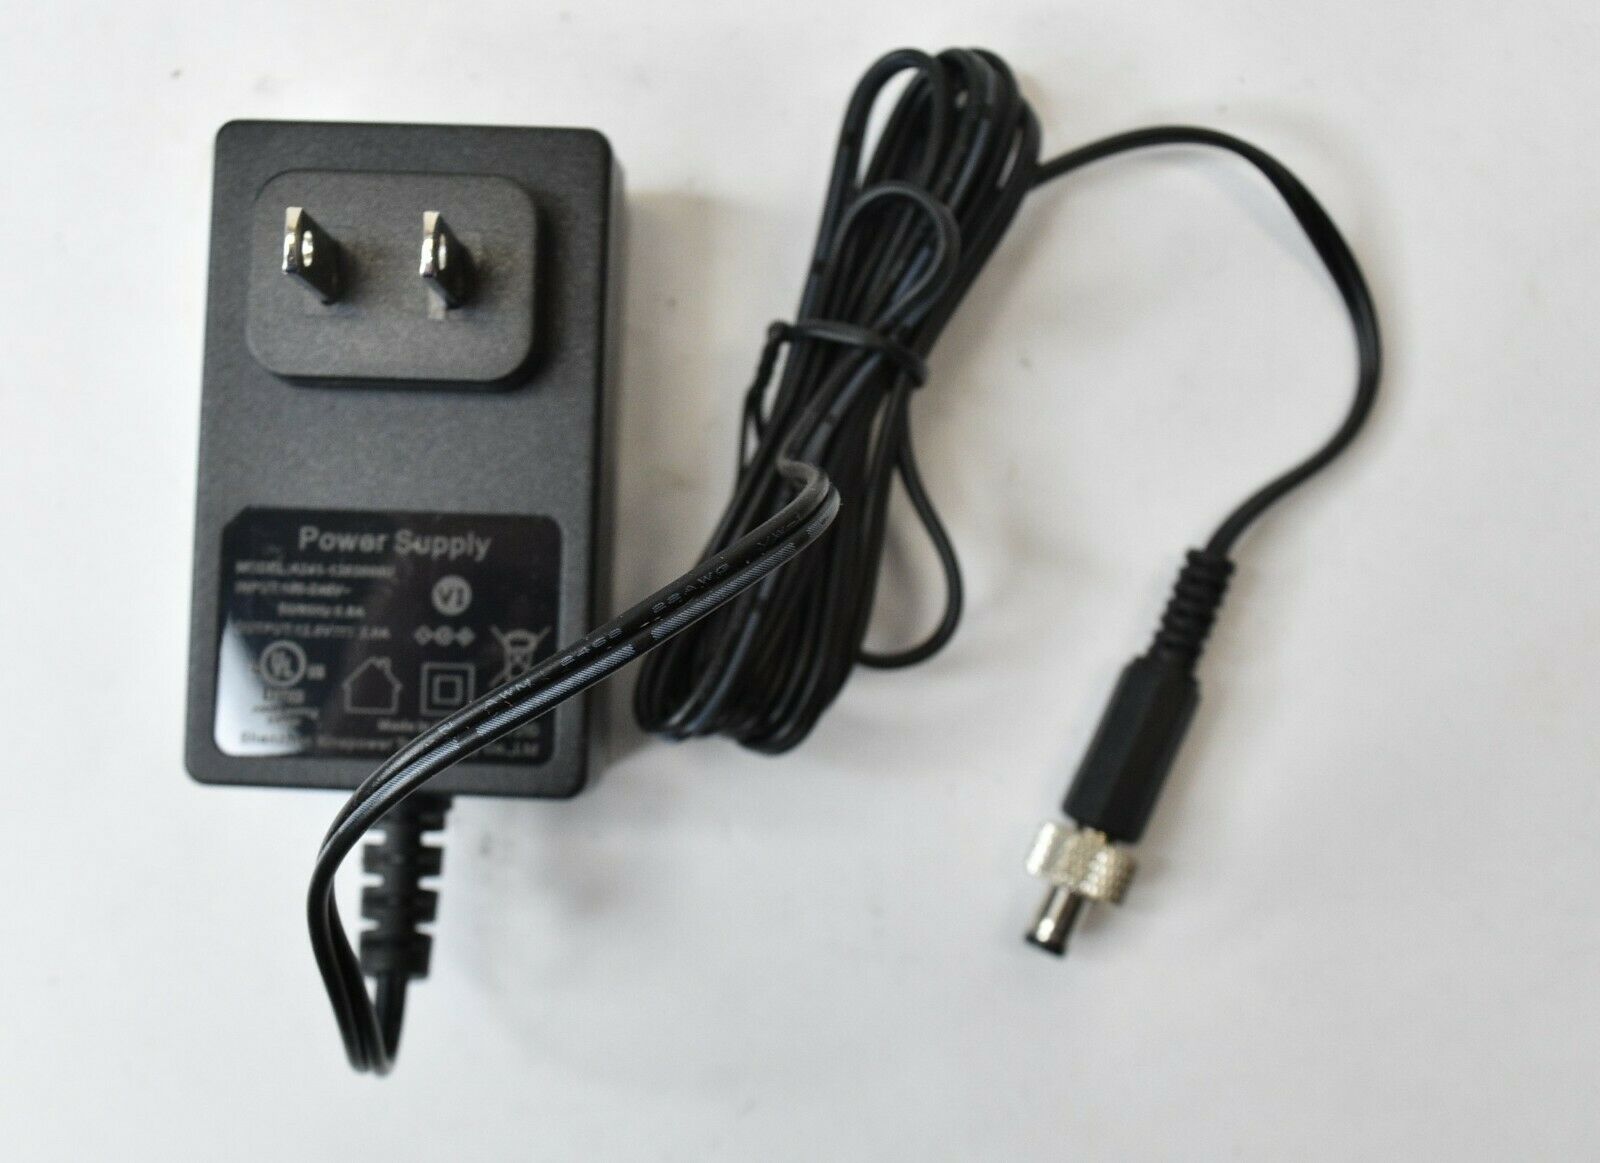 Shenzhen Xinspower A241-1202000U Power Supply Adapter Unit 12V 2A Type: Adapter Features: Powered Output Voltage: